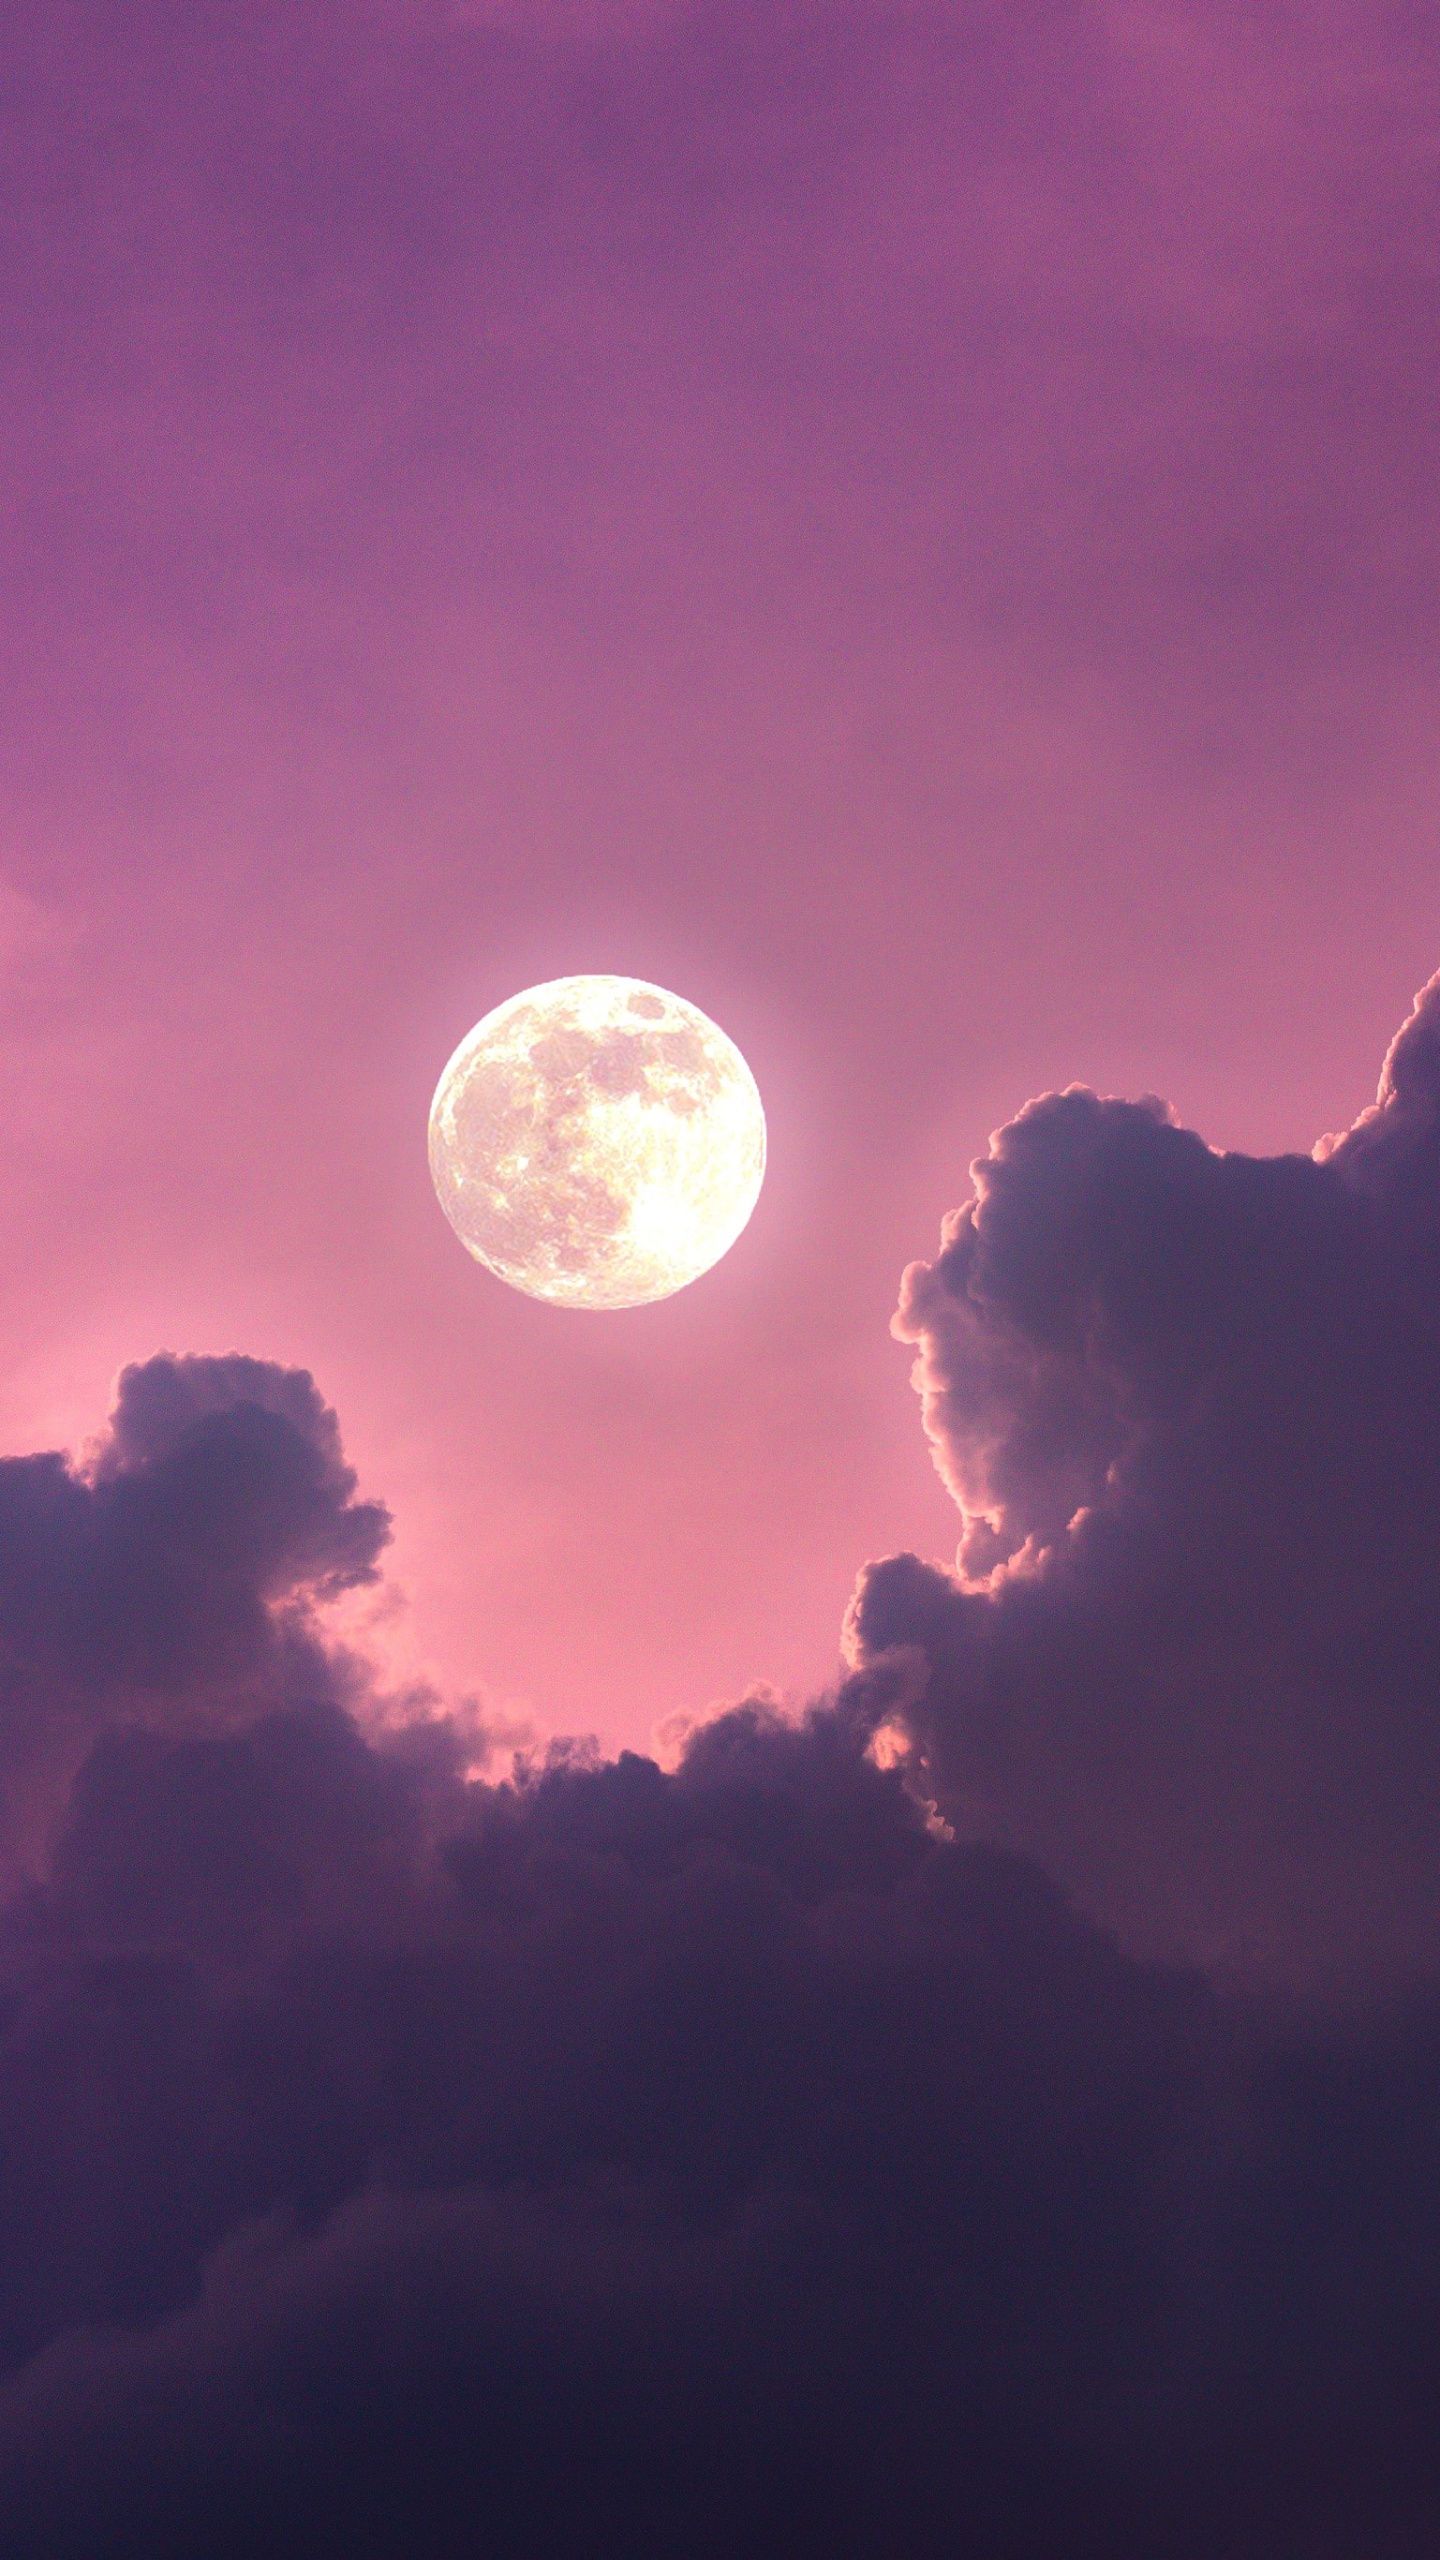 Full moon Wallpaper 4K, Clouds, Pink sky, Scenic, Aesthetic, Nature